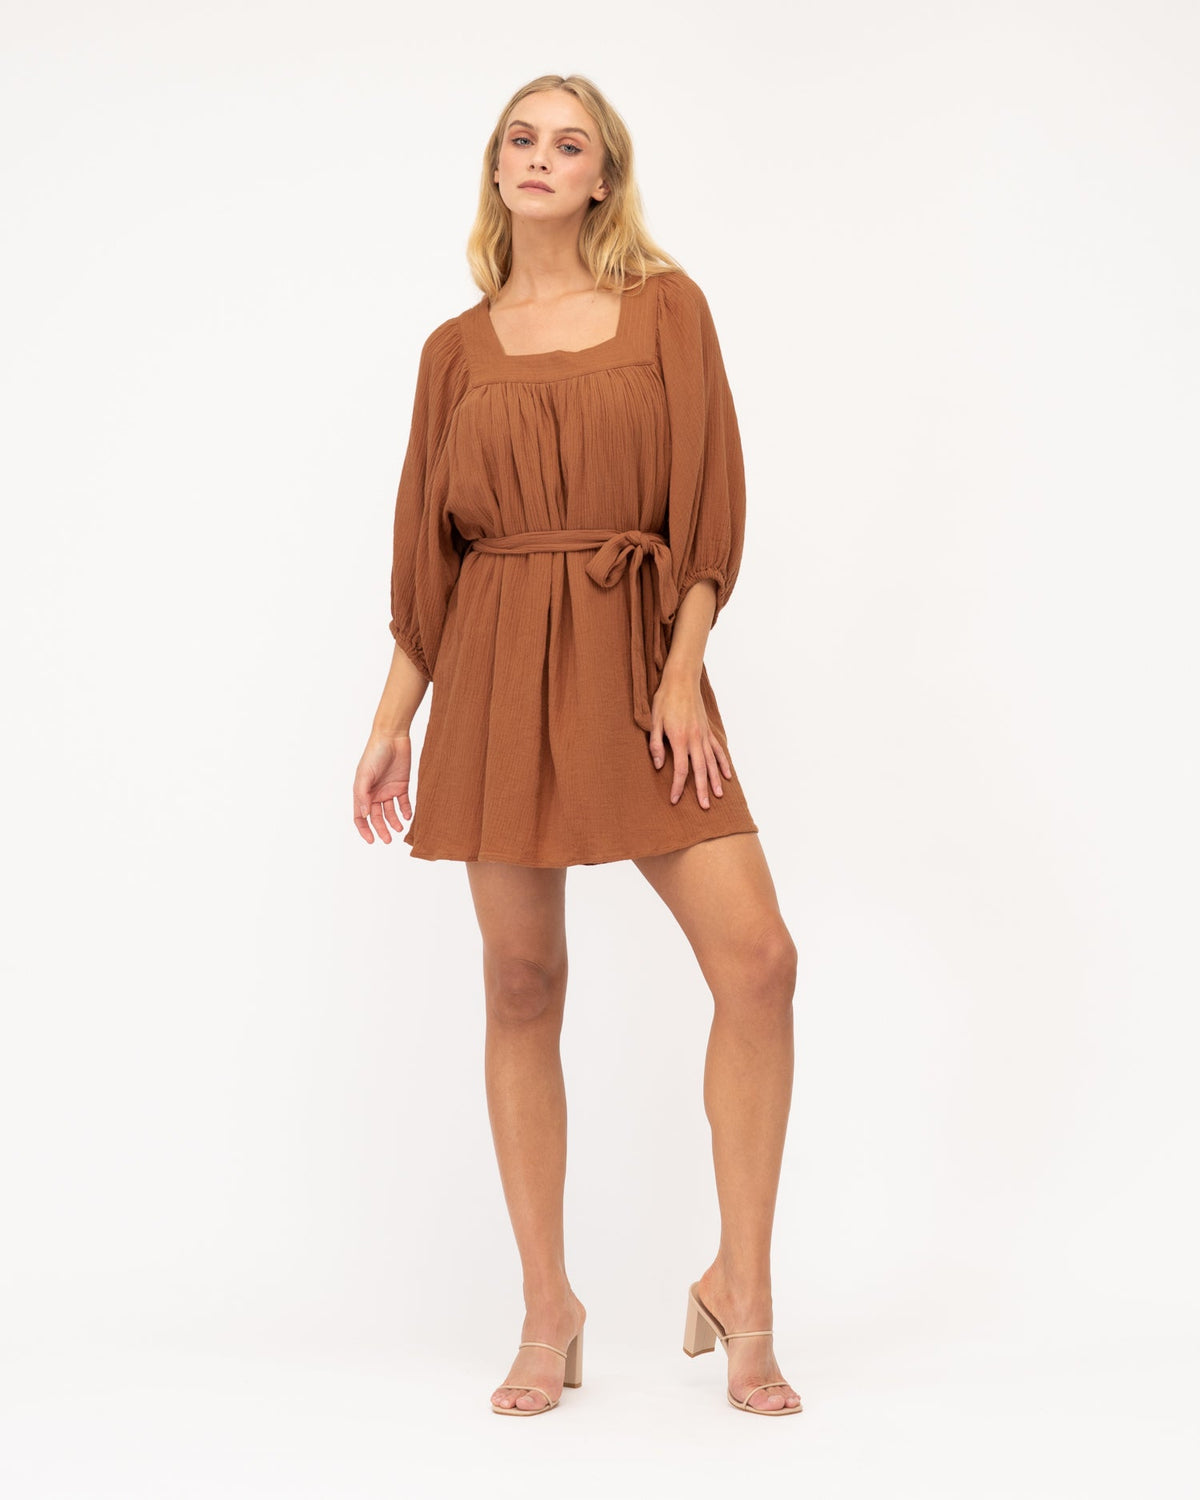 BROWN SQUARE NECK DRESS WITH TIE